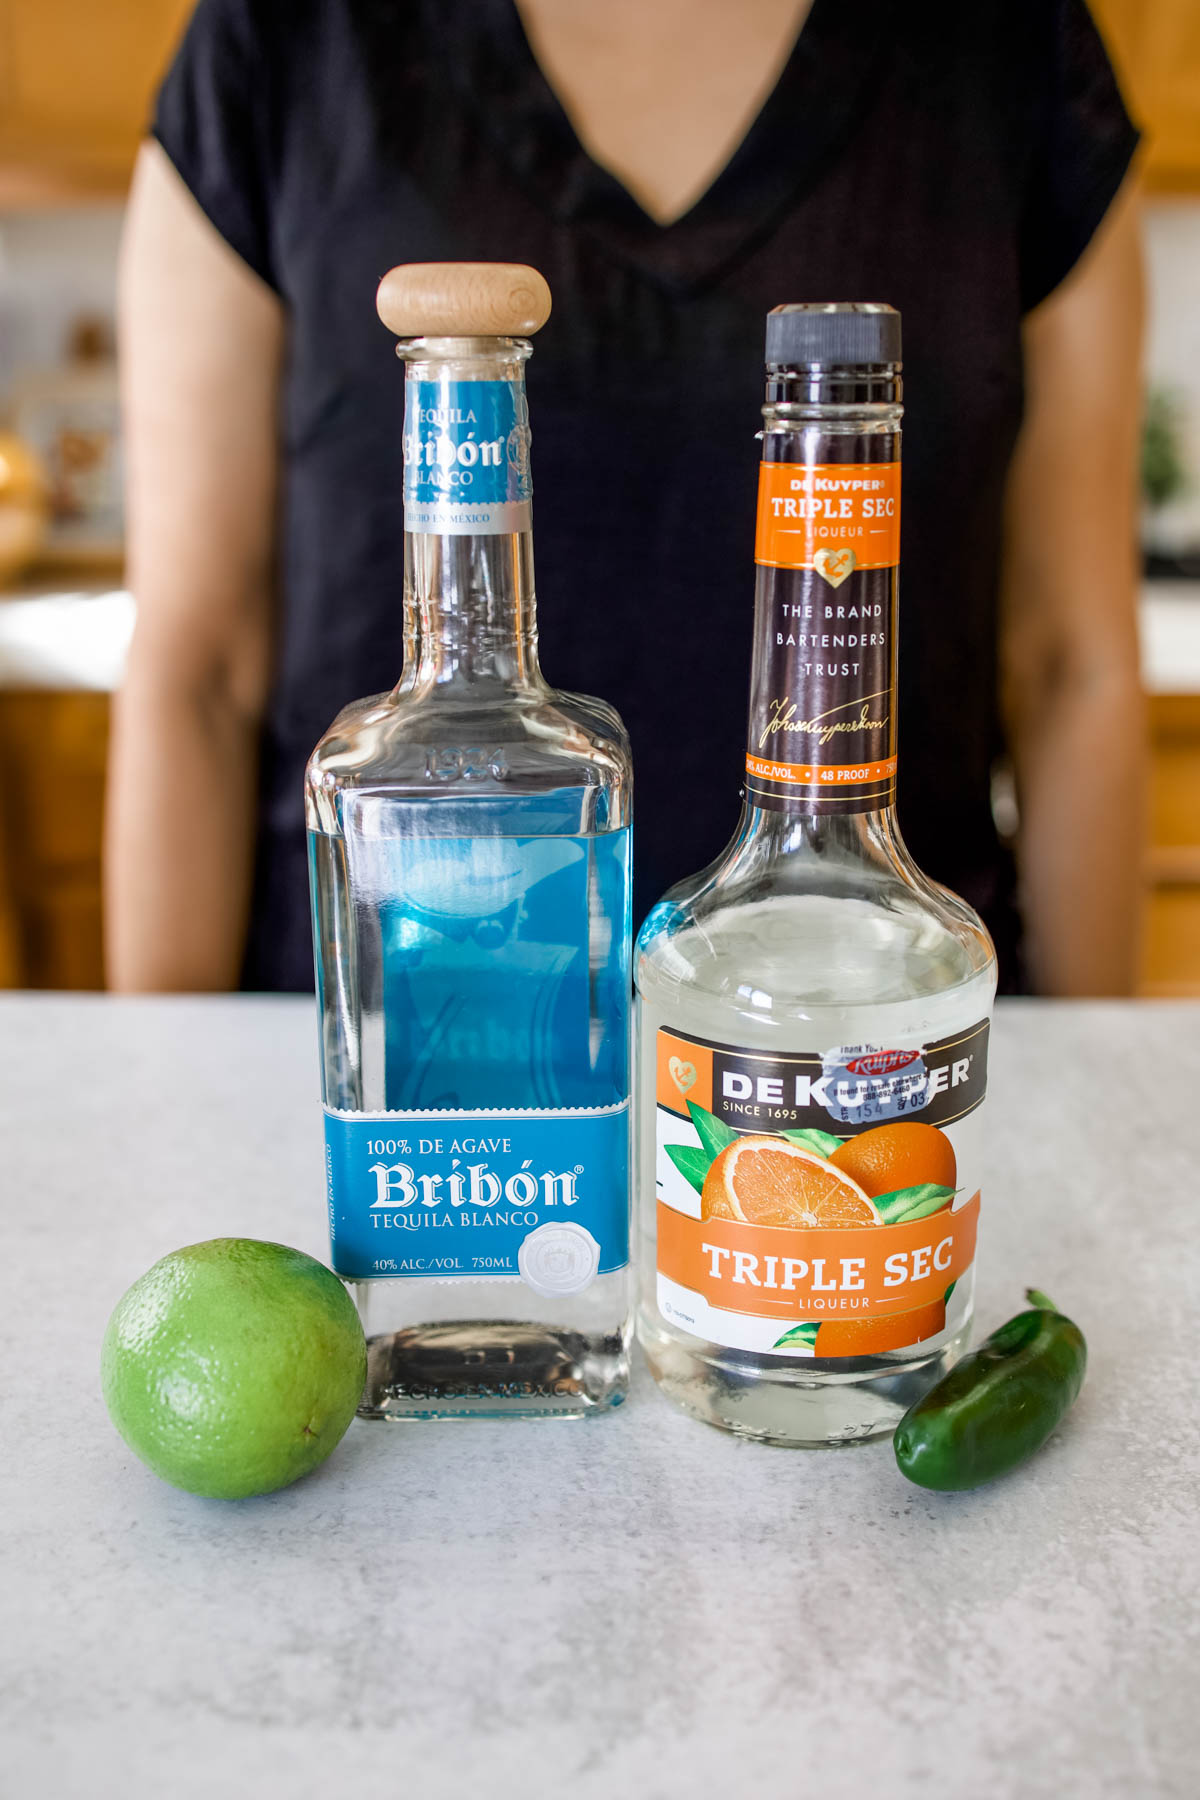 Bottles of Tequila Blanco and Triple Sec along with a fresh lime and jalapeno on a counter.